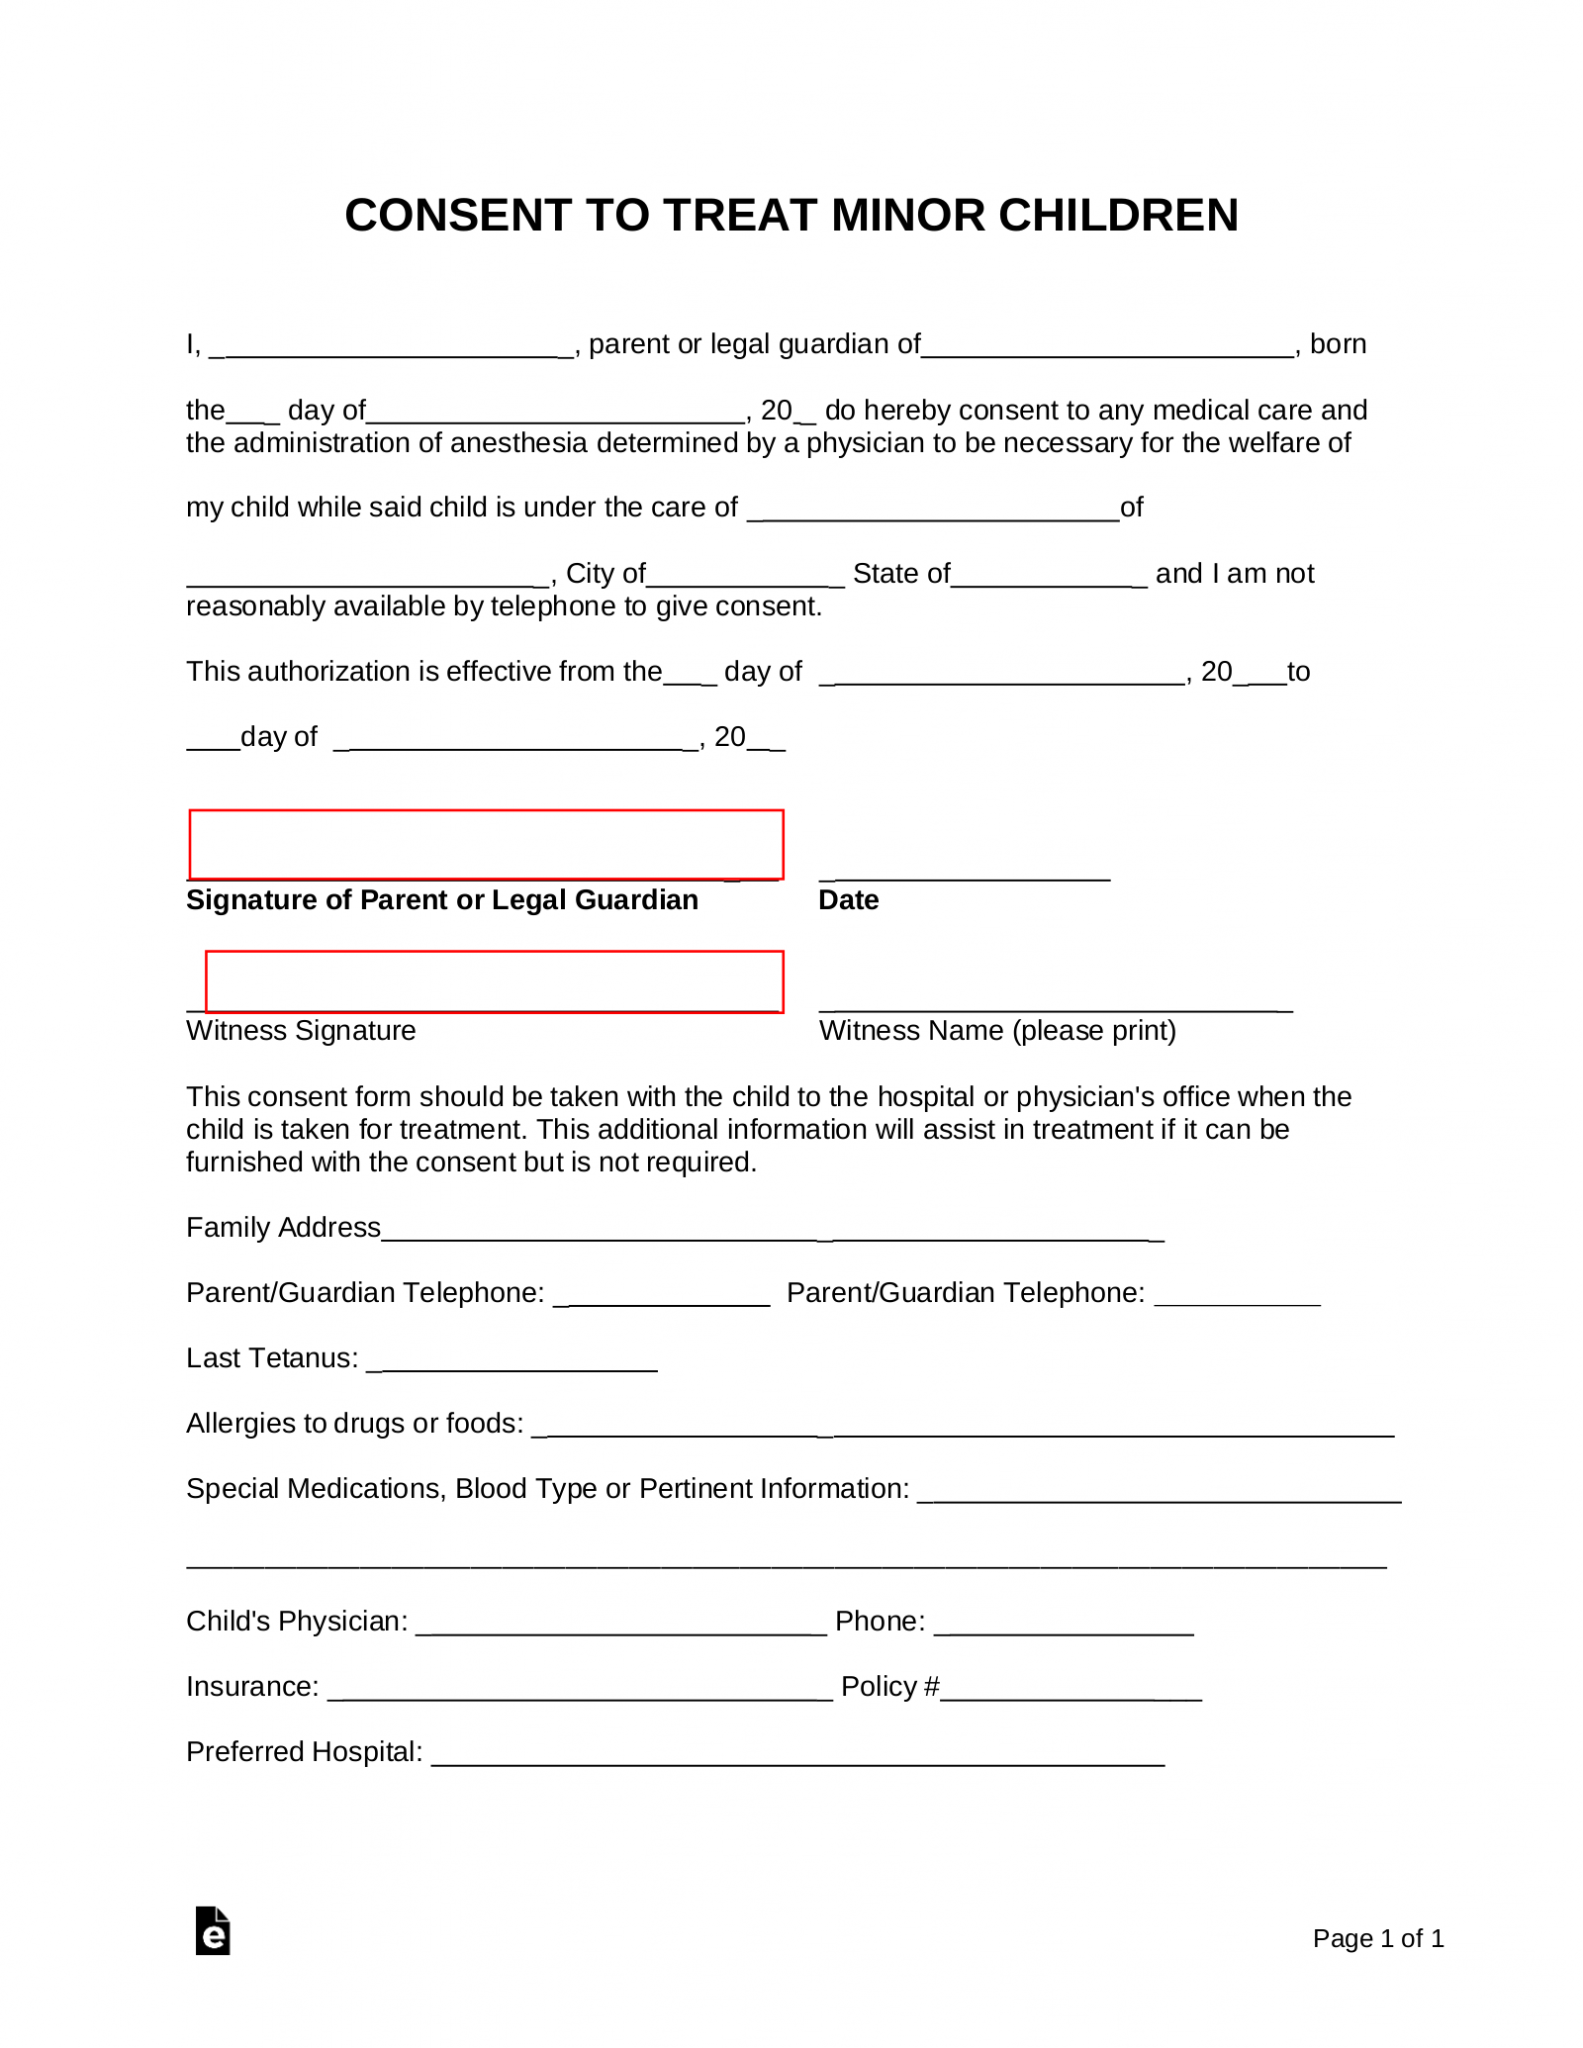 free-printable-medical-consent-form-for-minor-child